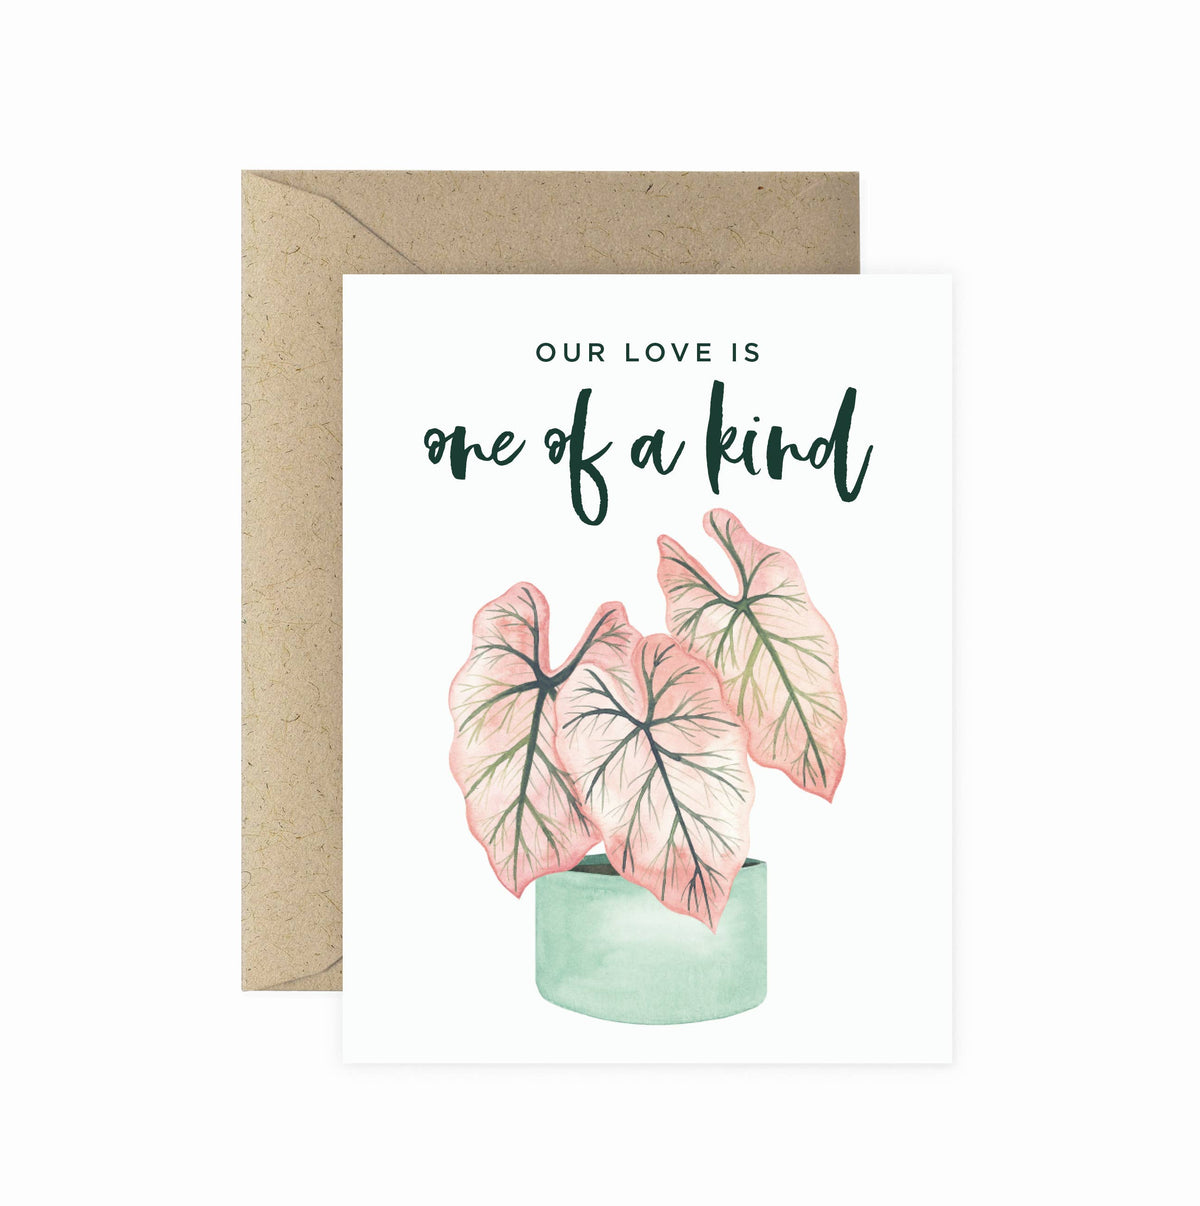 One of a Kind Greeting Card | Valentine's Love Friendship